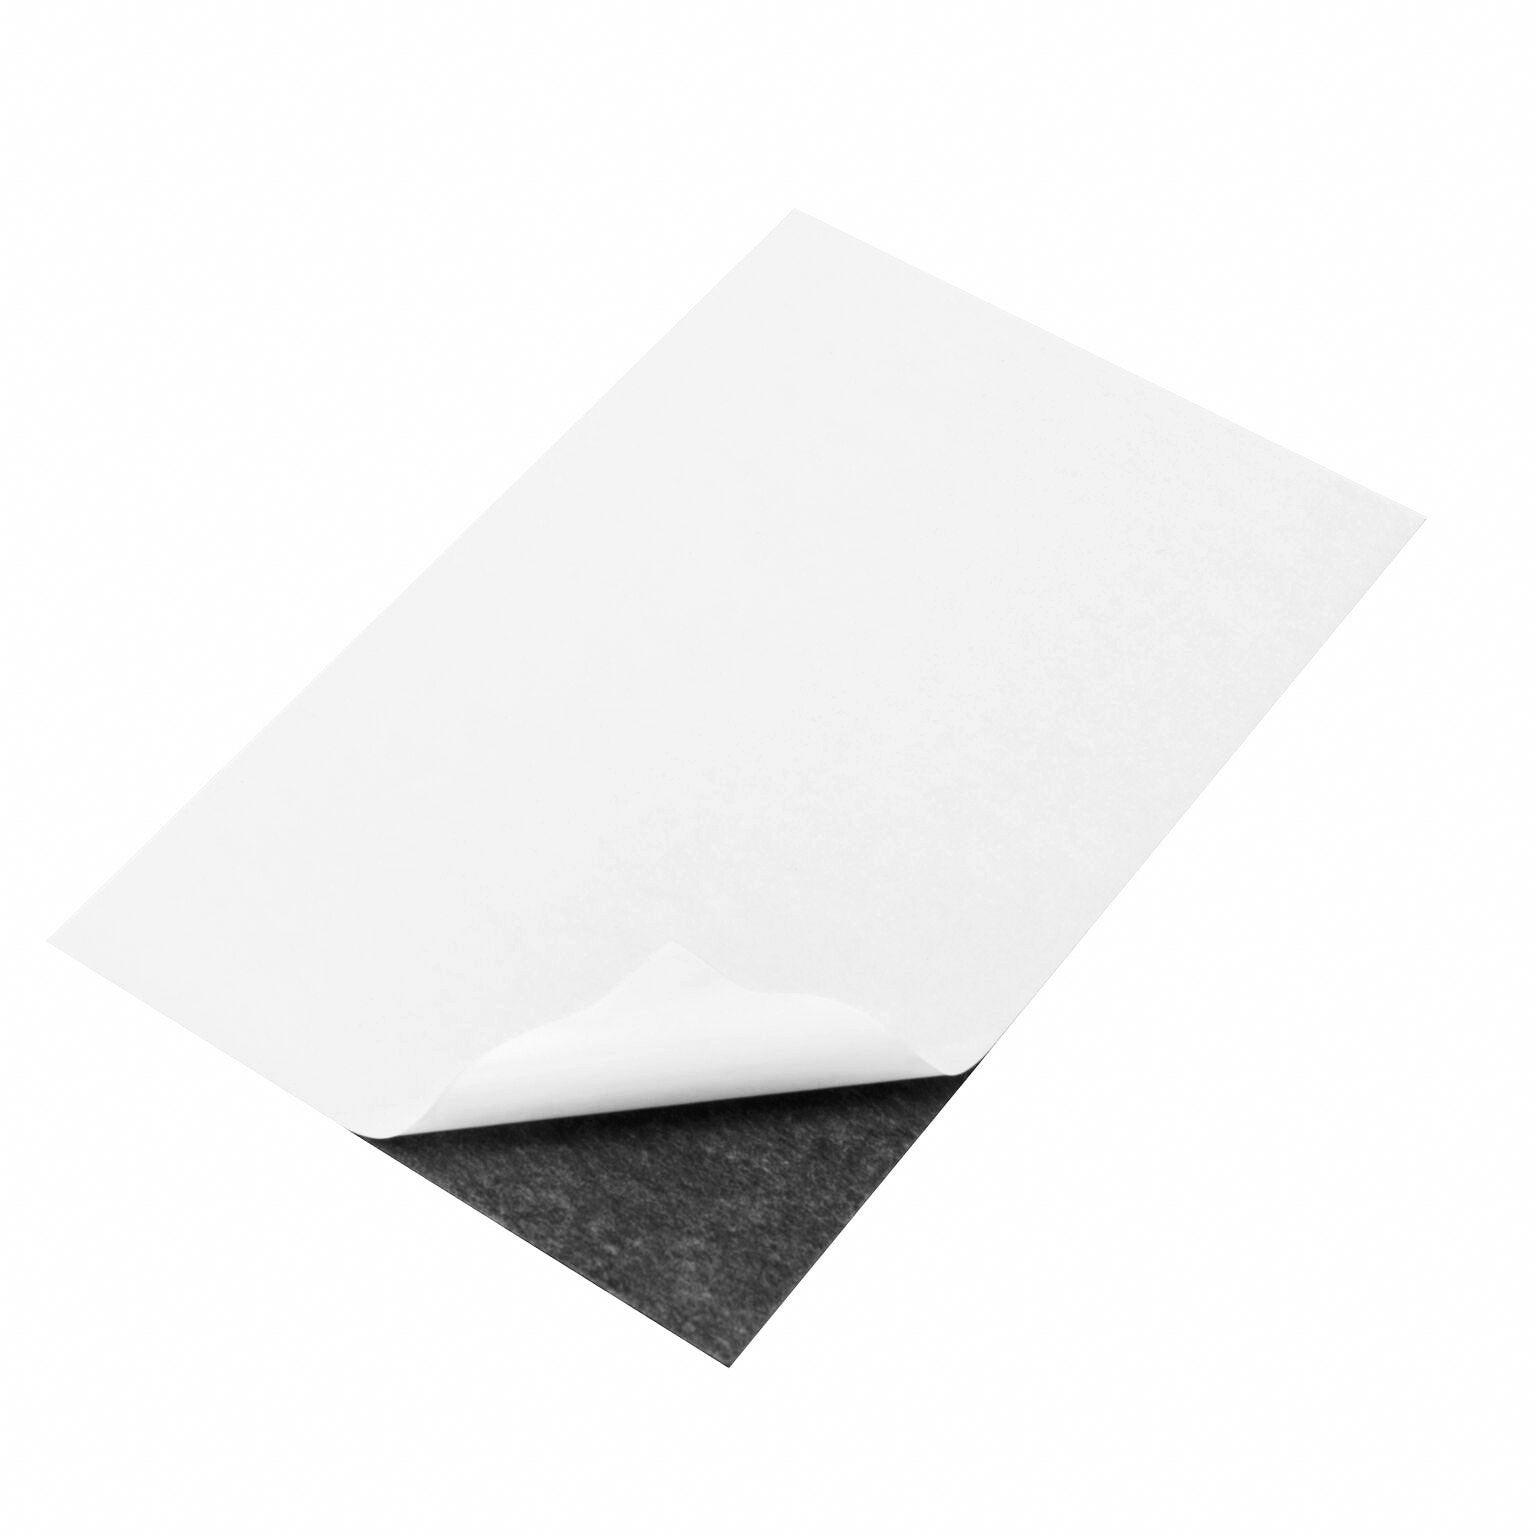  4 x 6 Plain Magnet Sheets 20 mil - 25 Pack Ideal for Craft  die Storage or applying Adhesive Items : Office Products